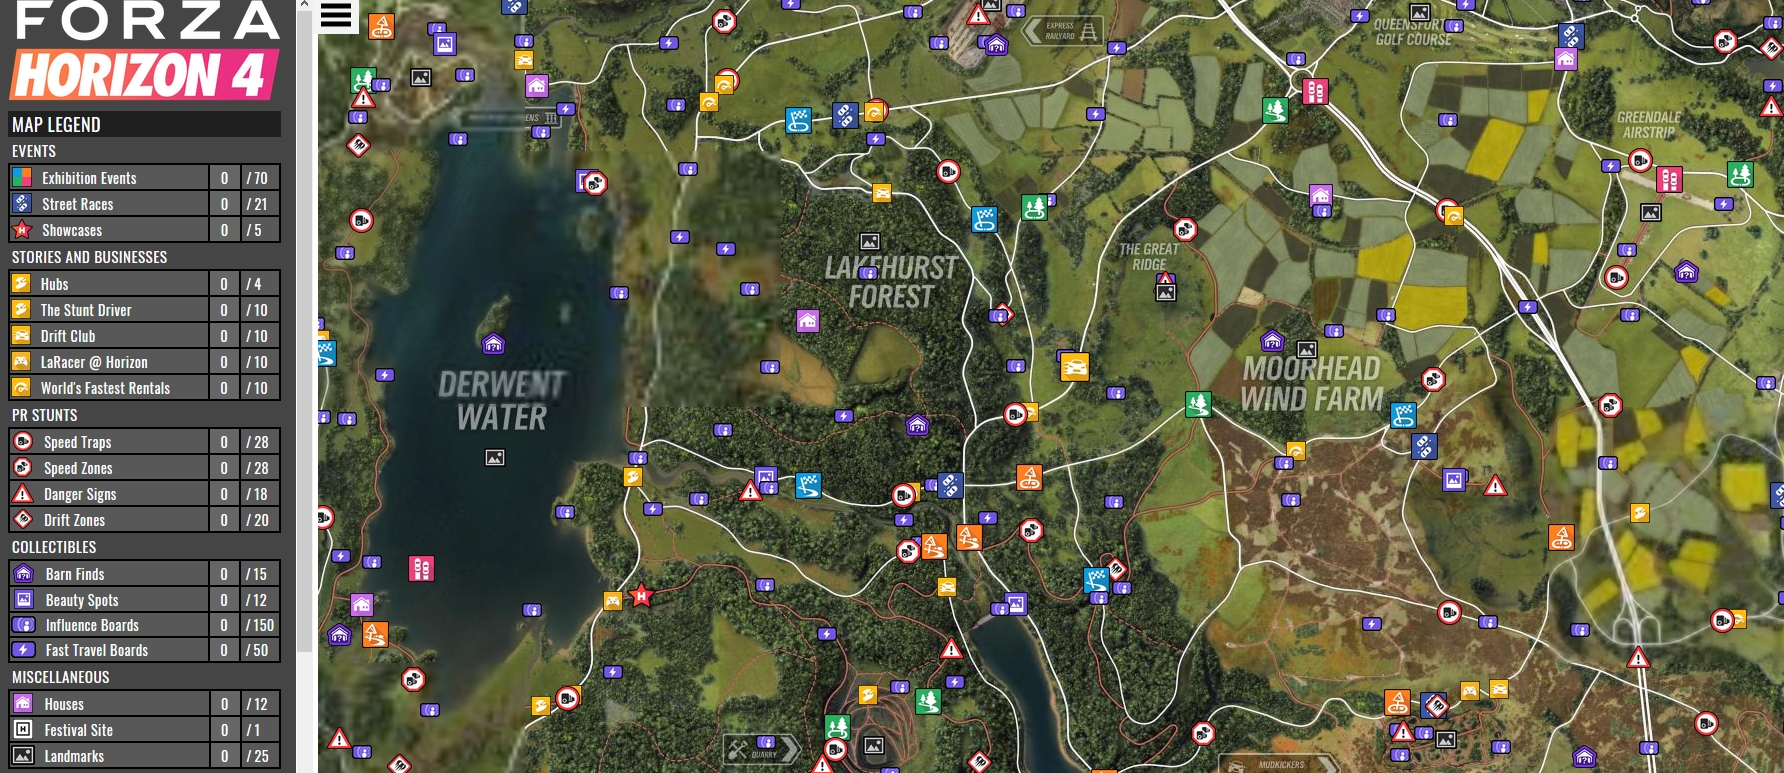 Forza Horizon 4 - Interactive Map by SwissGameGuides